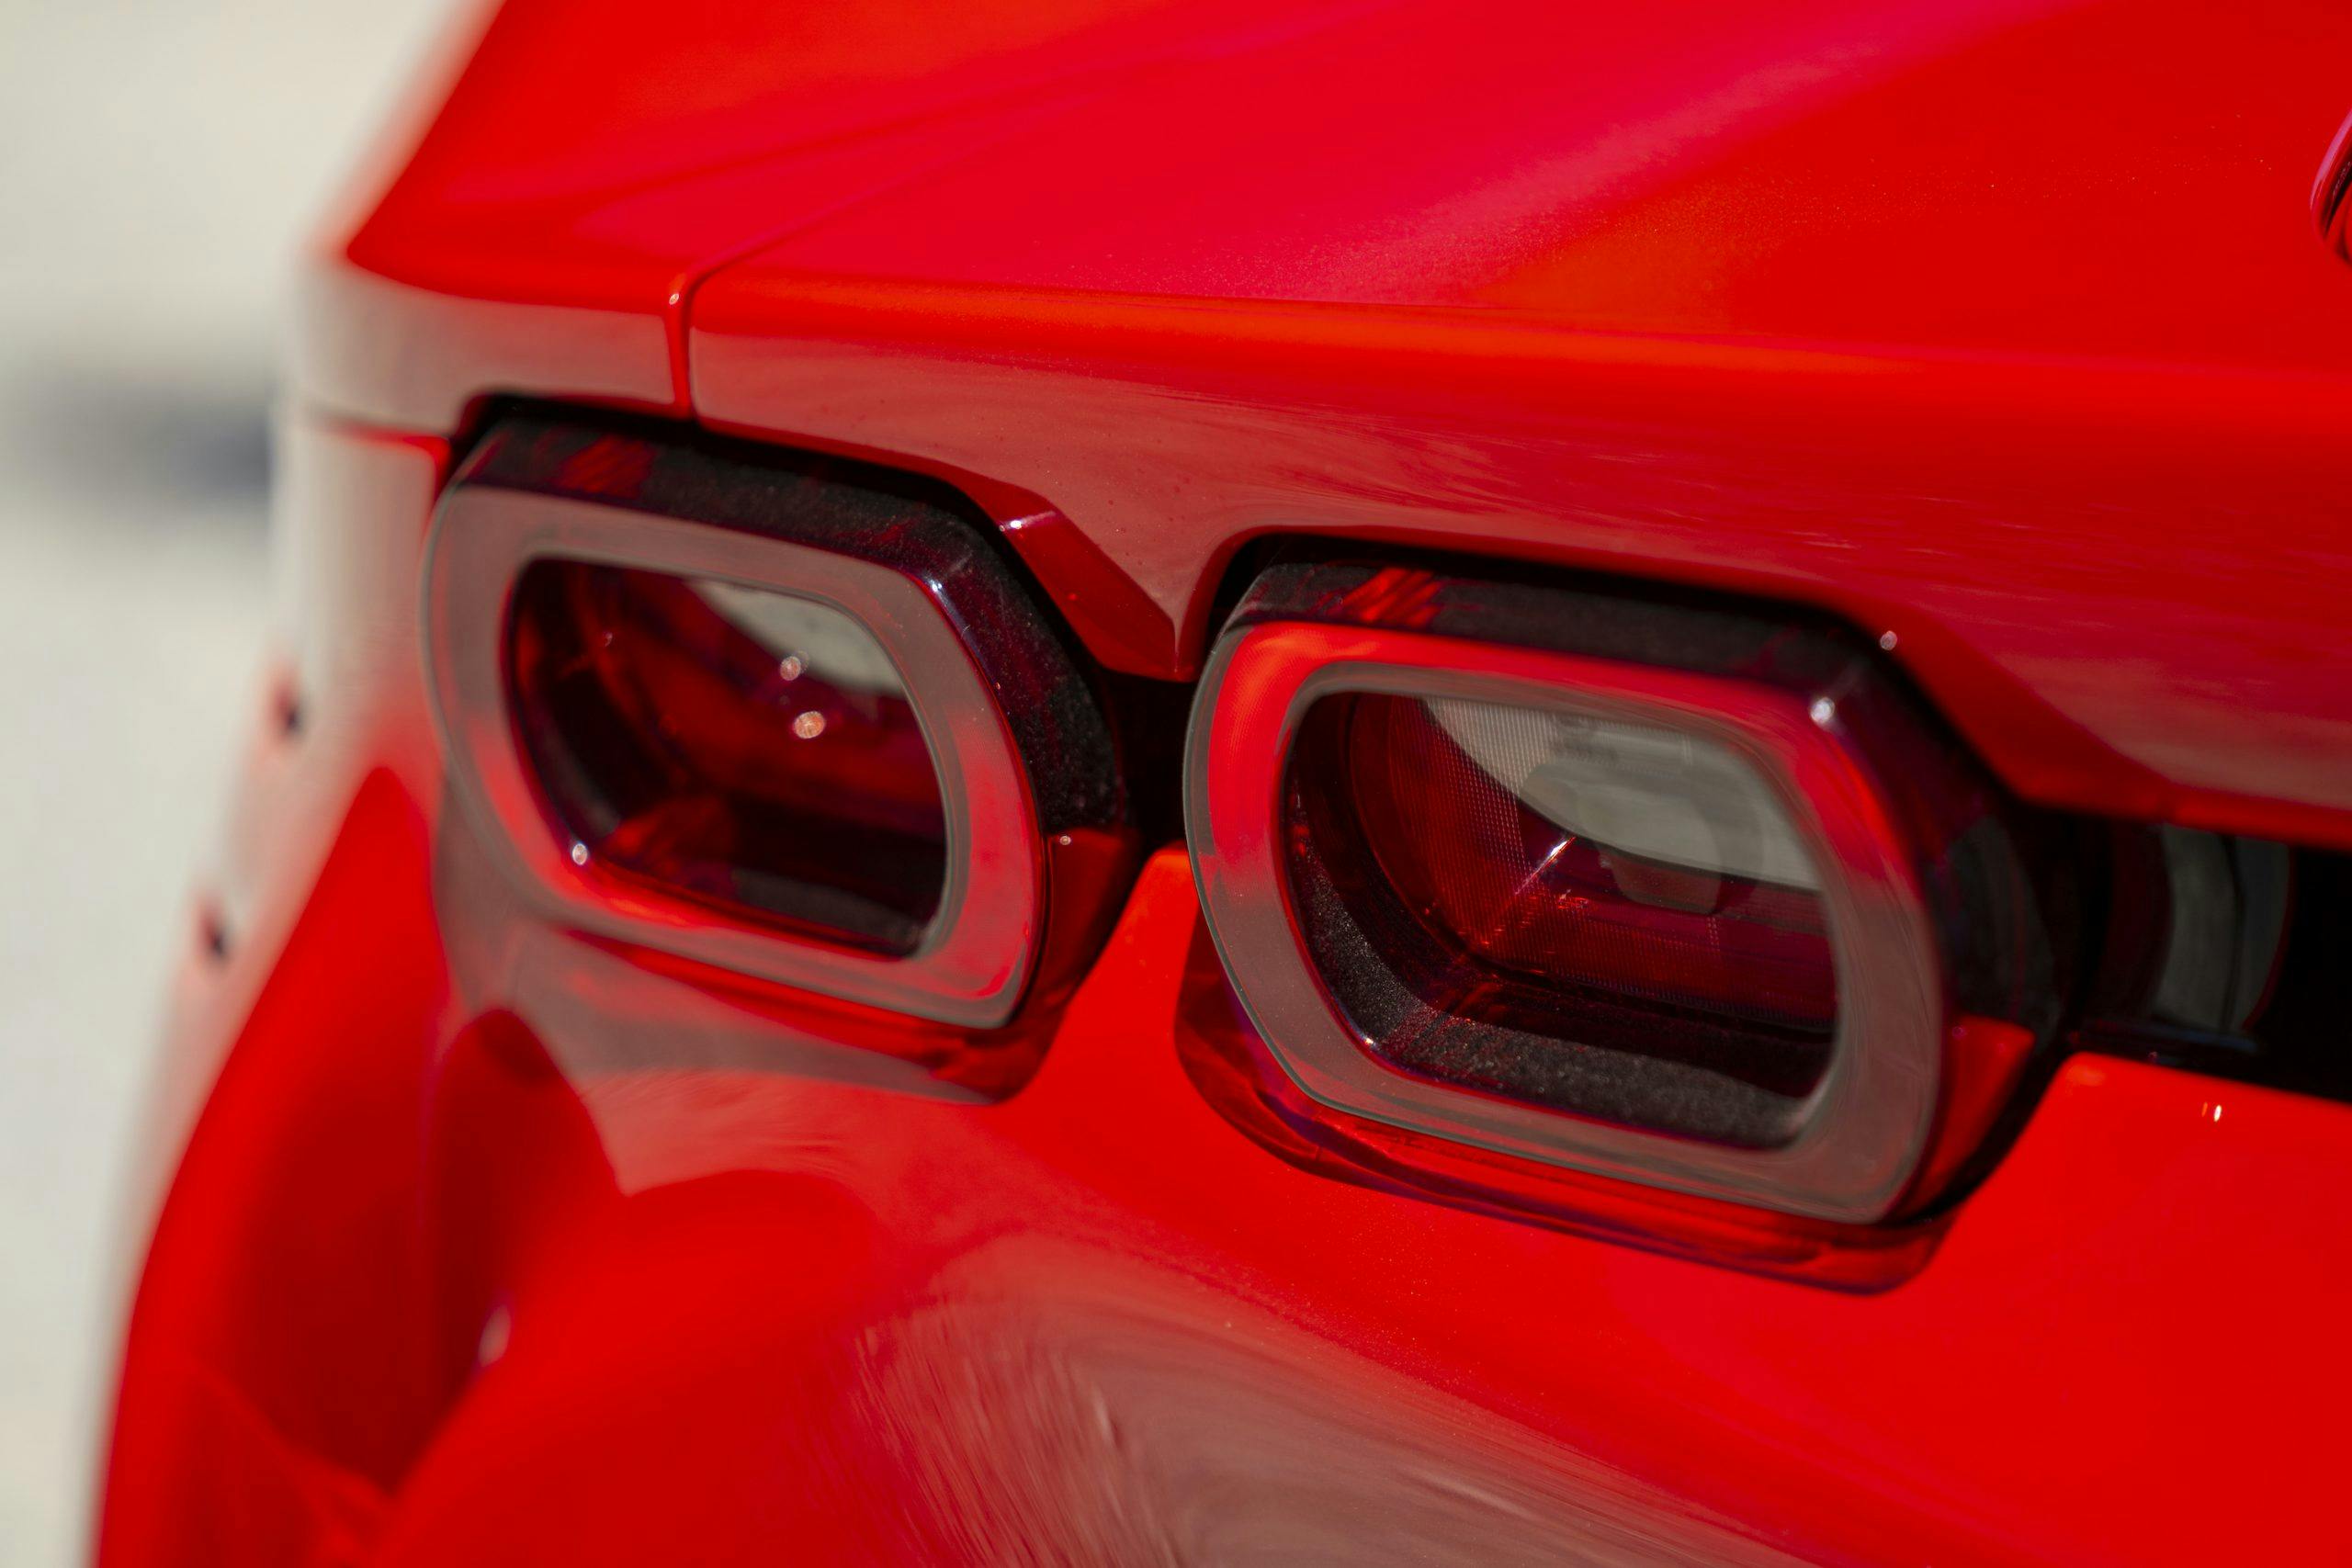 SF90 Stradale taillight